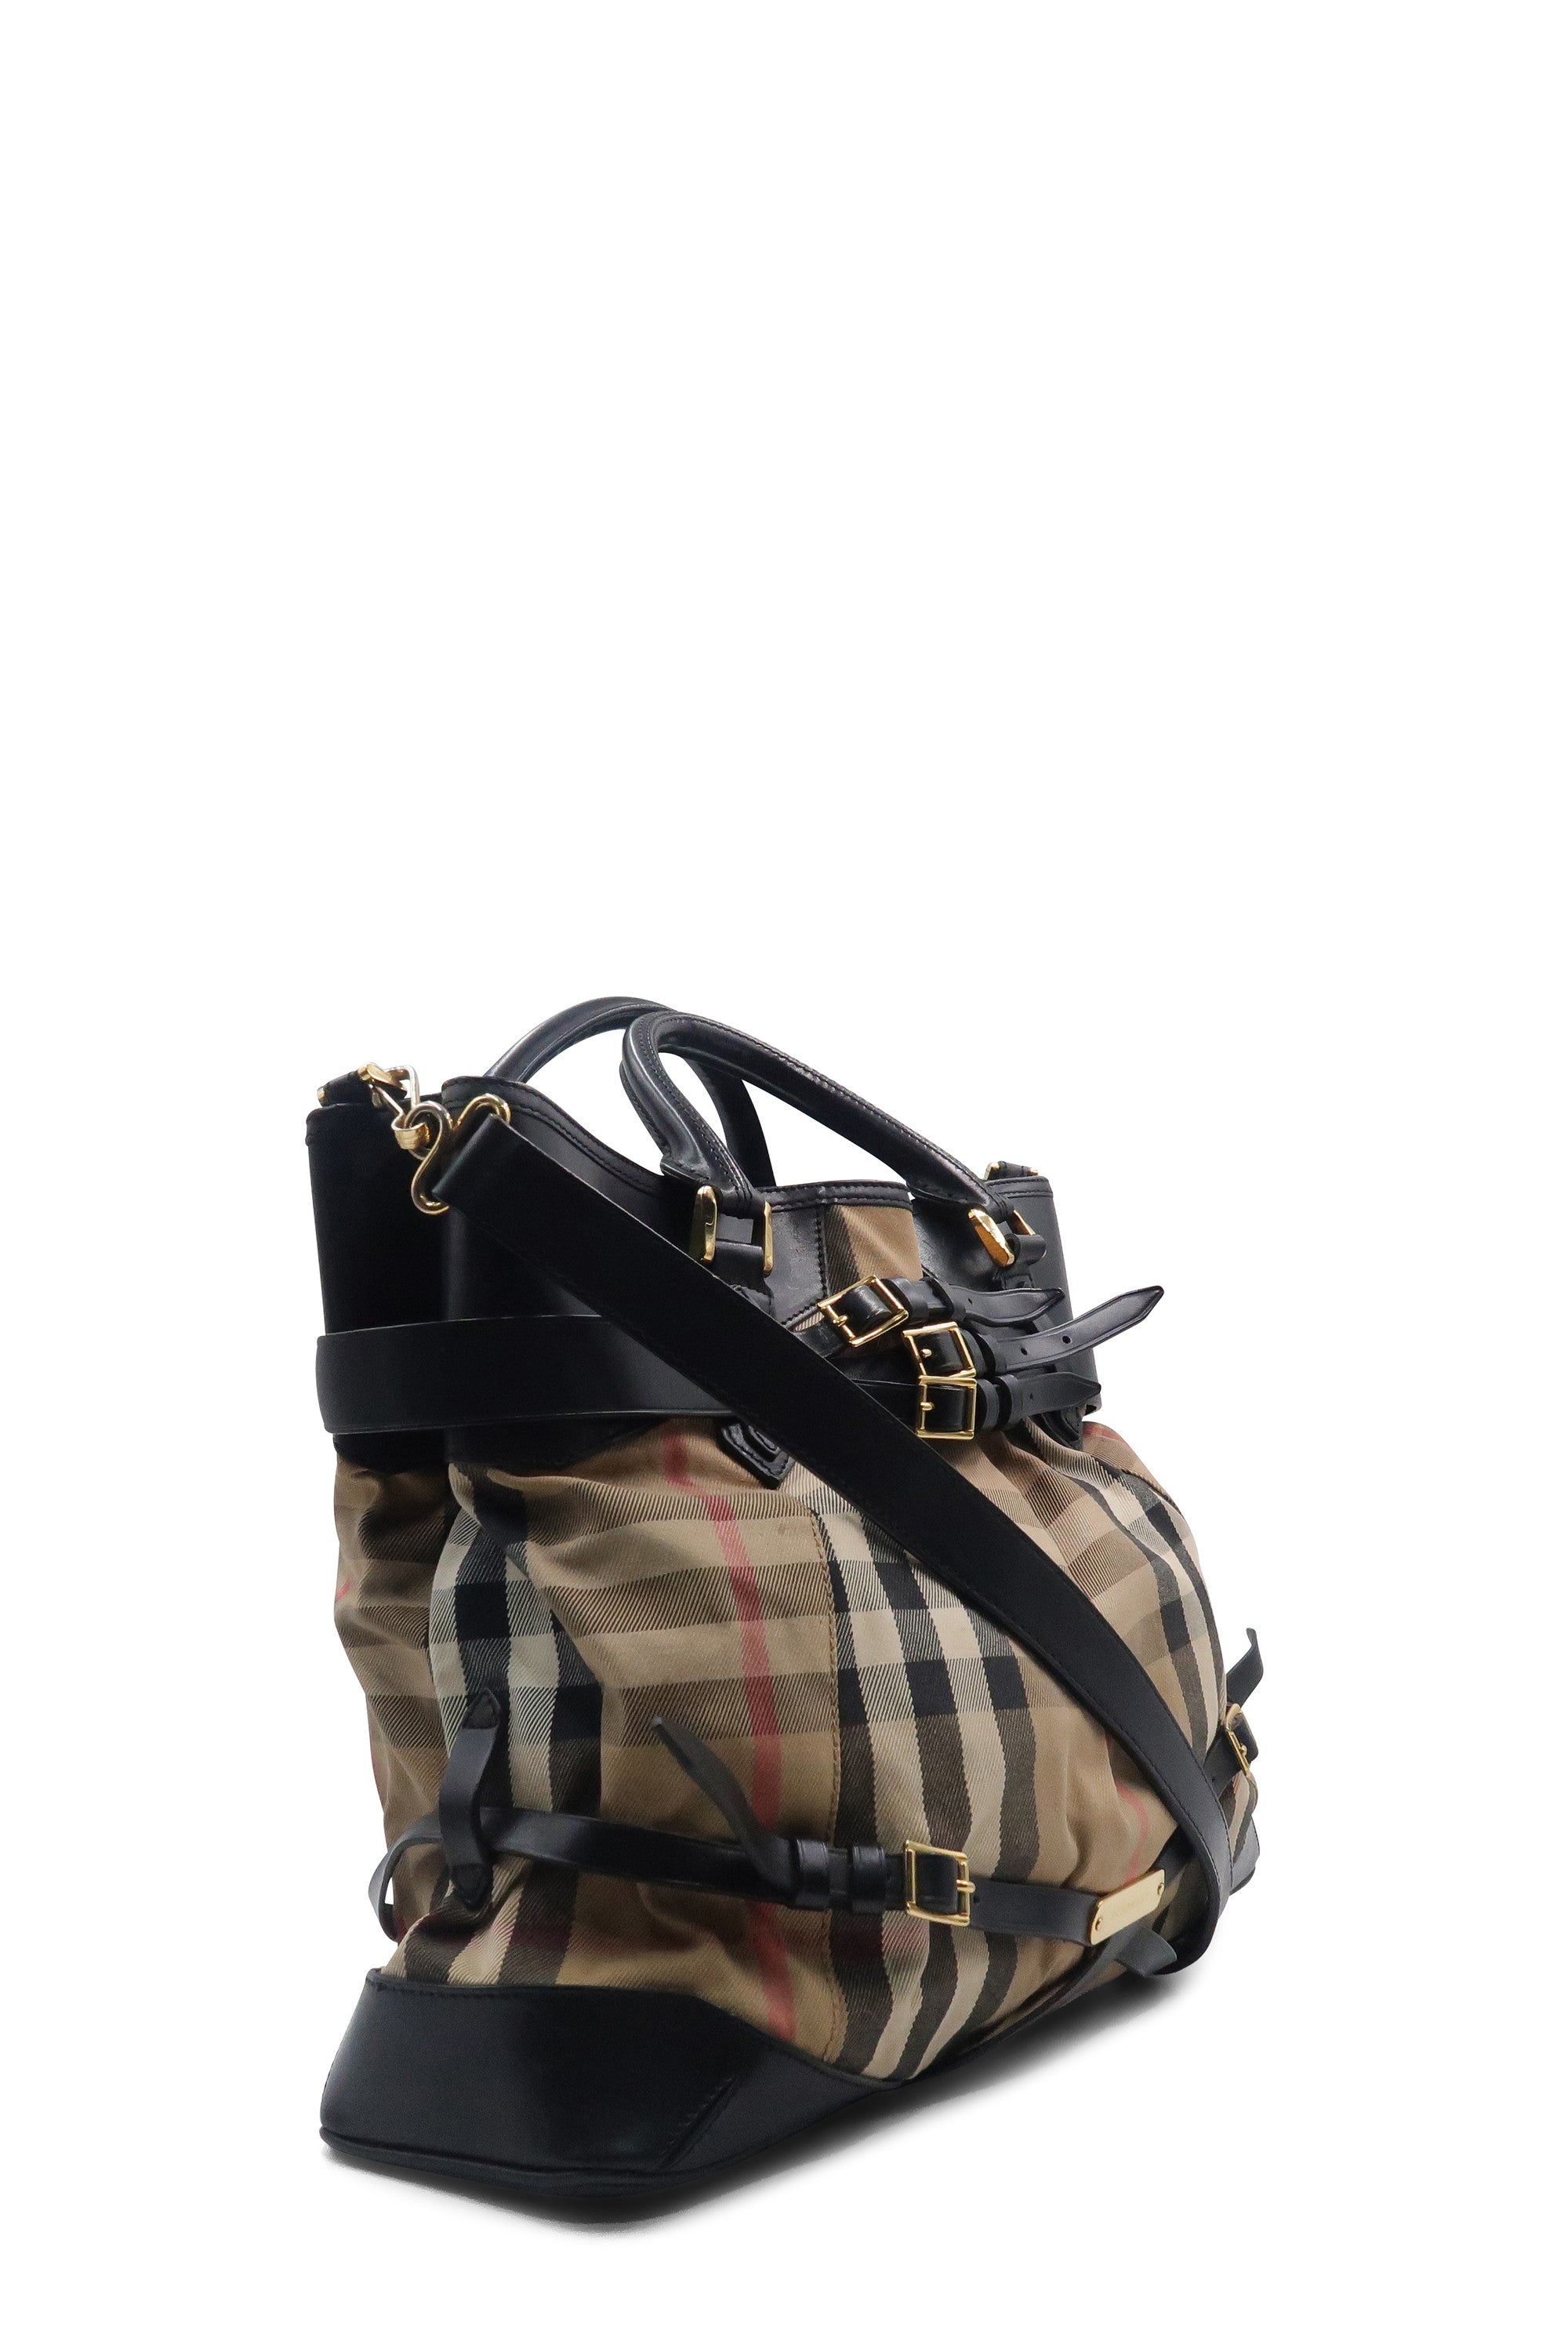 BURBERRY Bridle House Check Medium Whipstitch Tote, Luxury, Bags